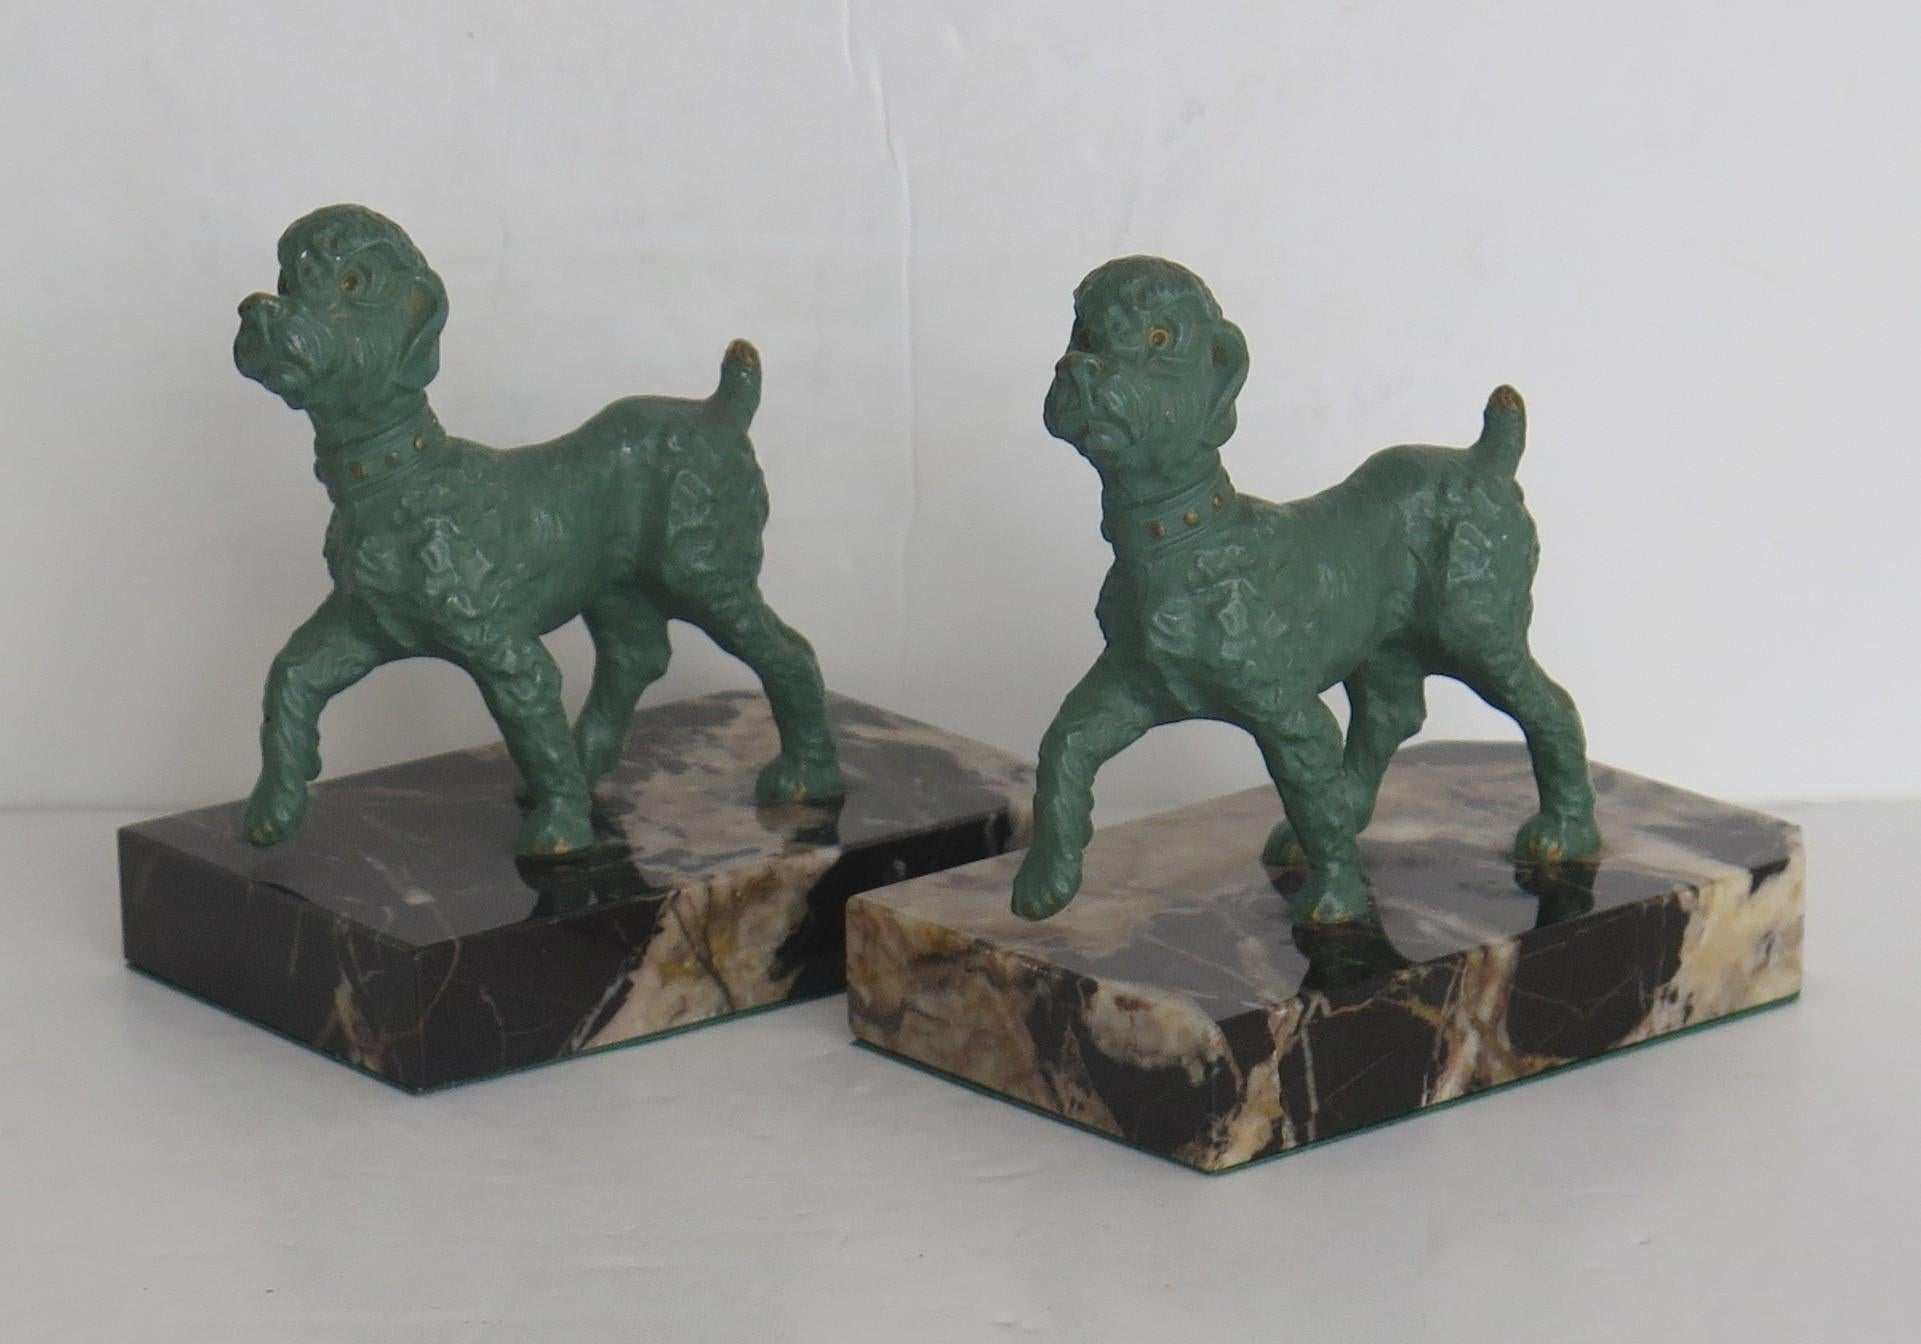 These are a beautiful pair of Art Deco period, Book ends of Poodle dogs on Portoro marble bases.

Each dog has been very well modelled with good detail. The dogs are made of spelter metal then cold painted by hand with a green finish having some